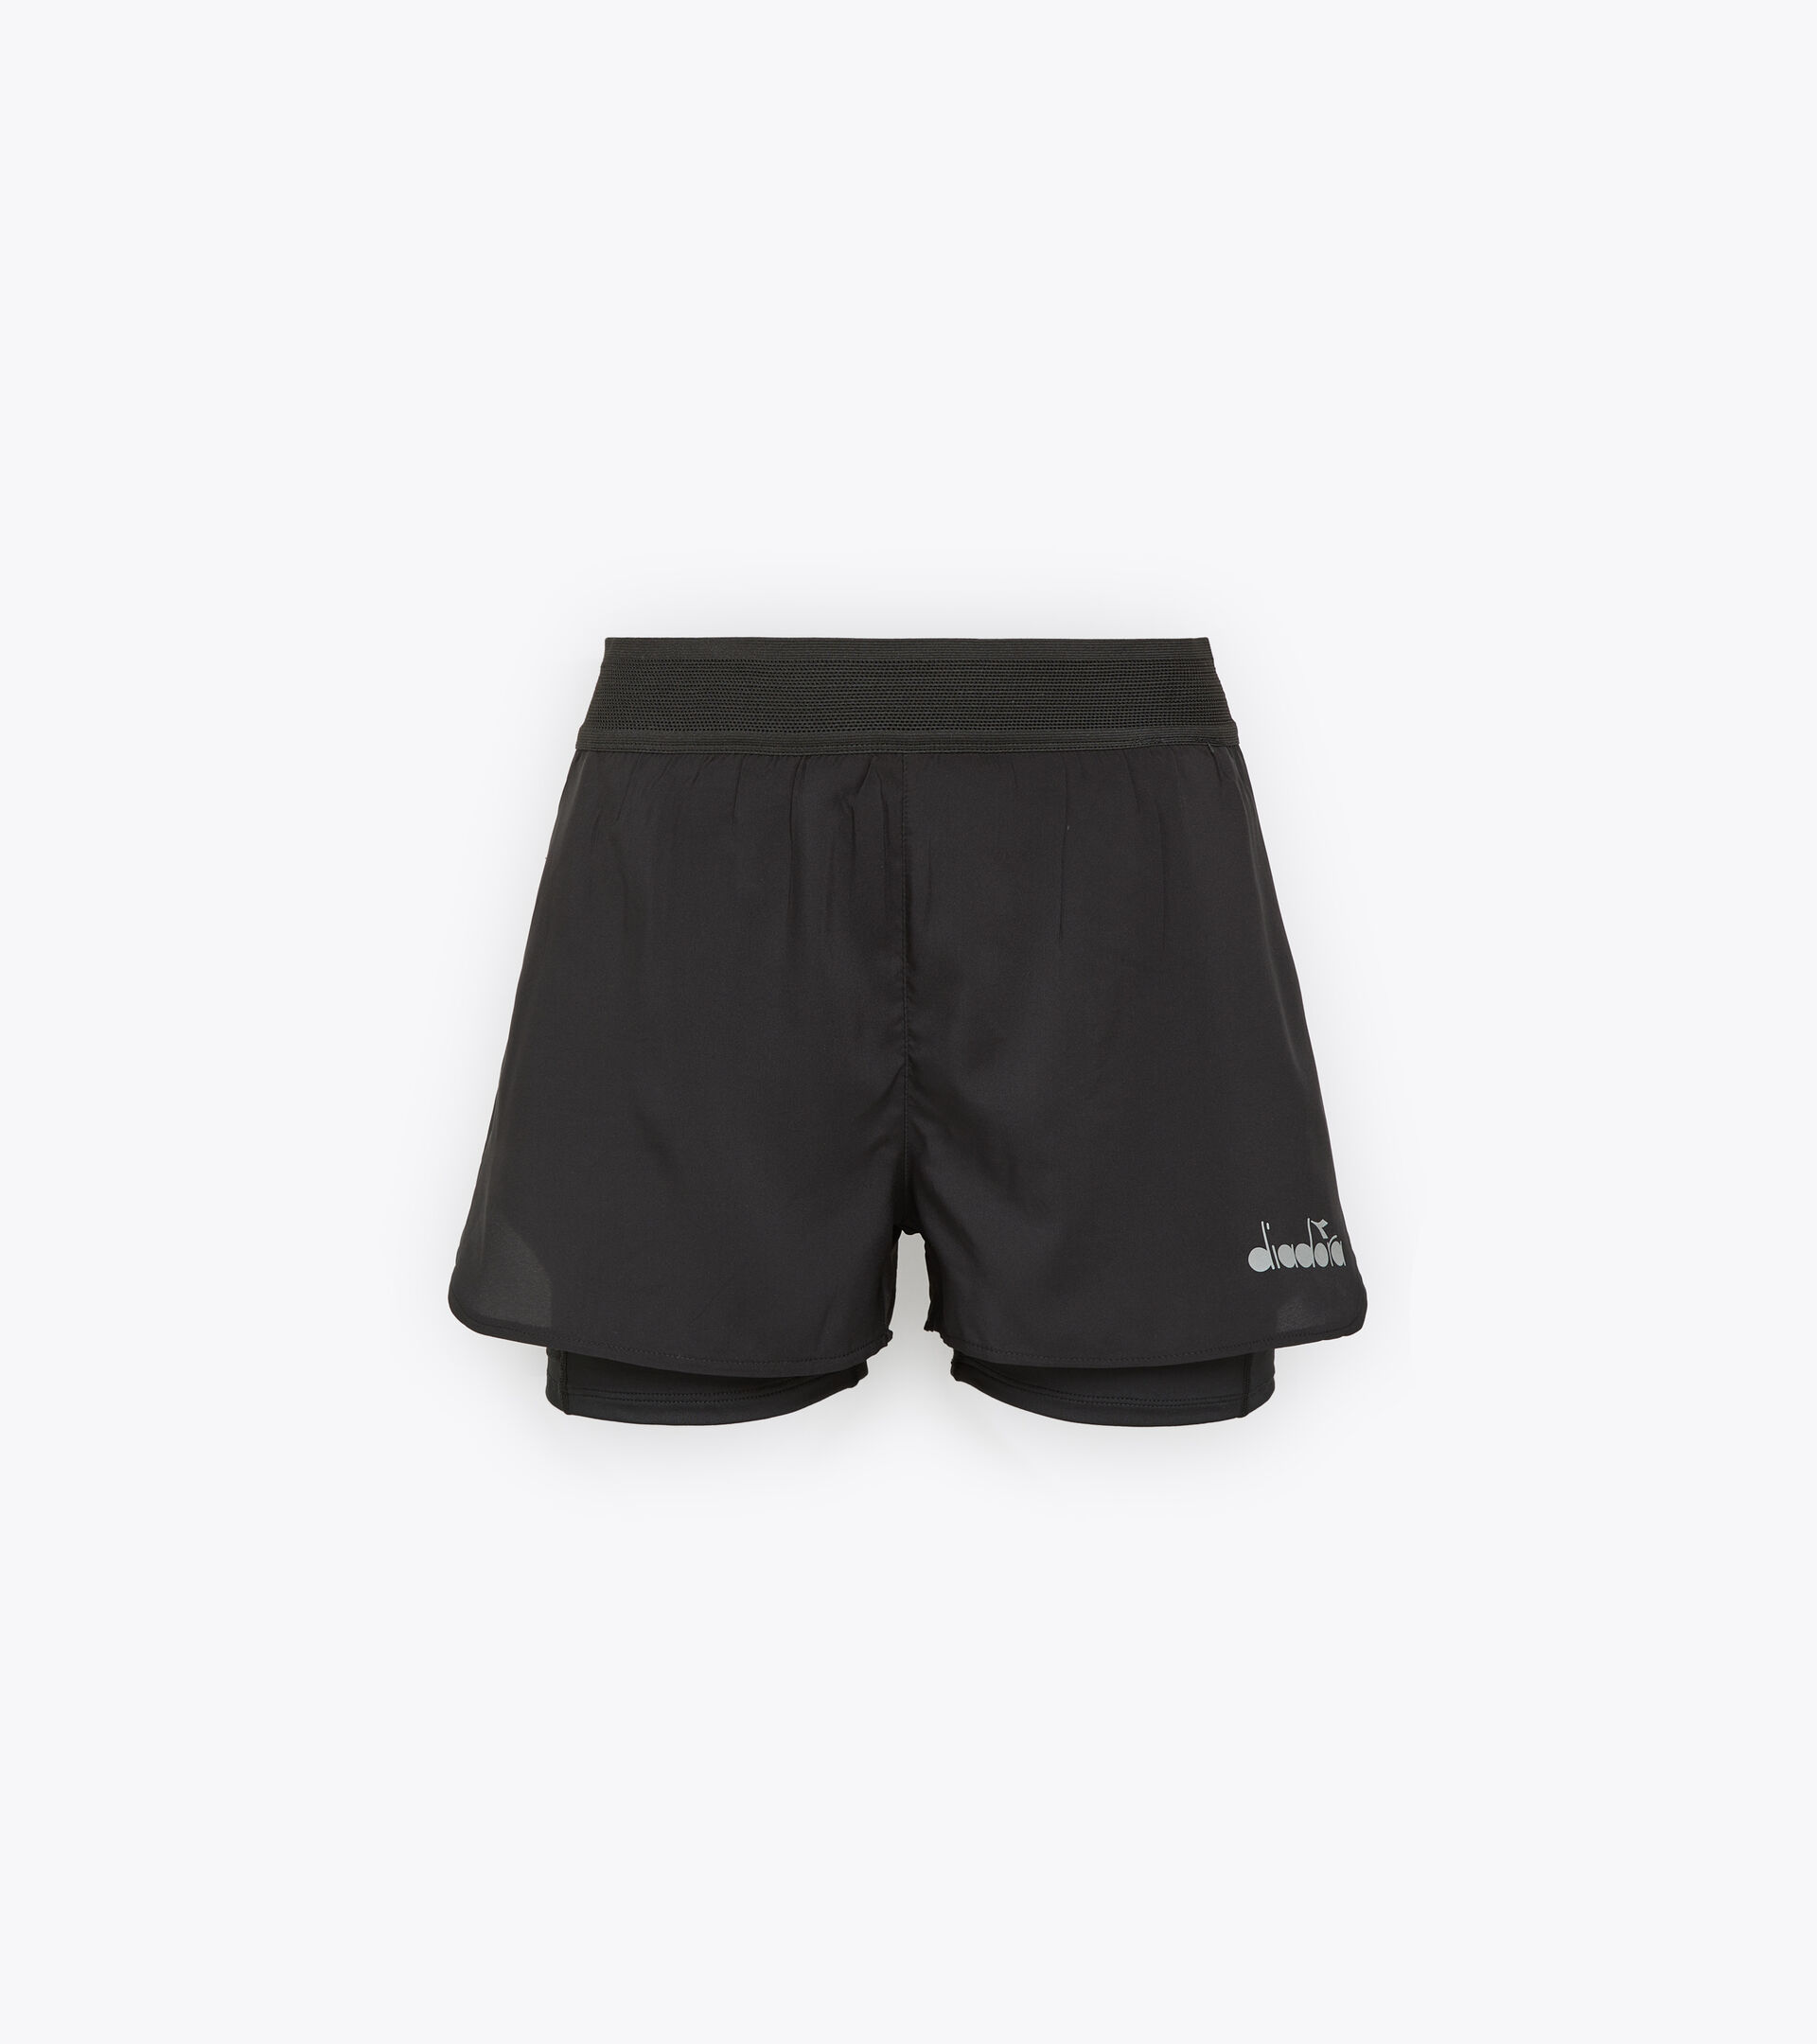 Double-Layer Shorts with Smart Pockets Blue